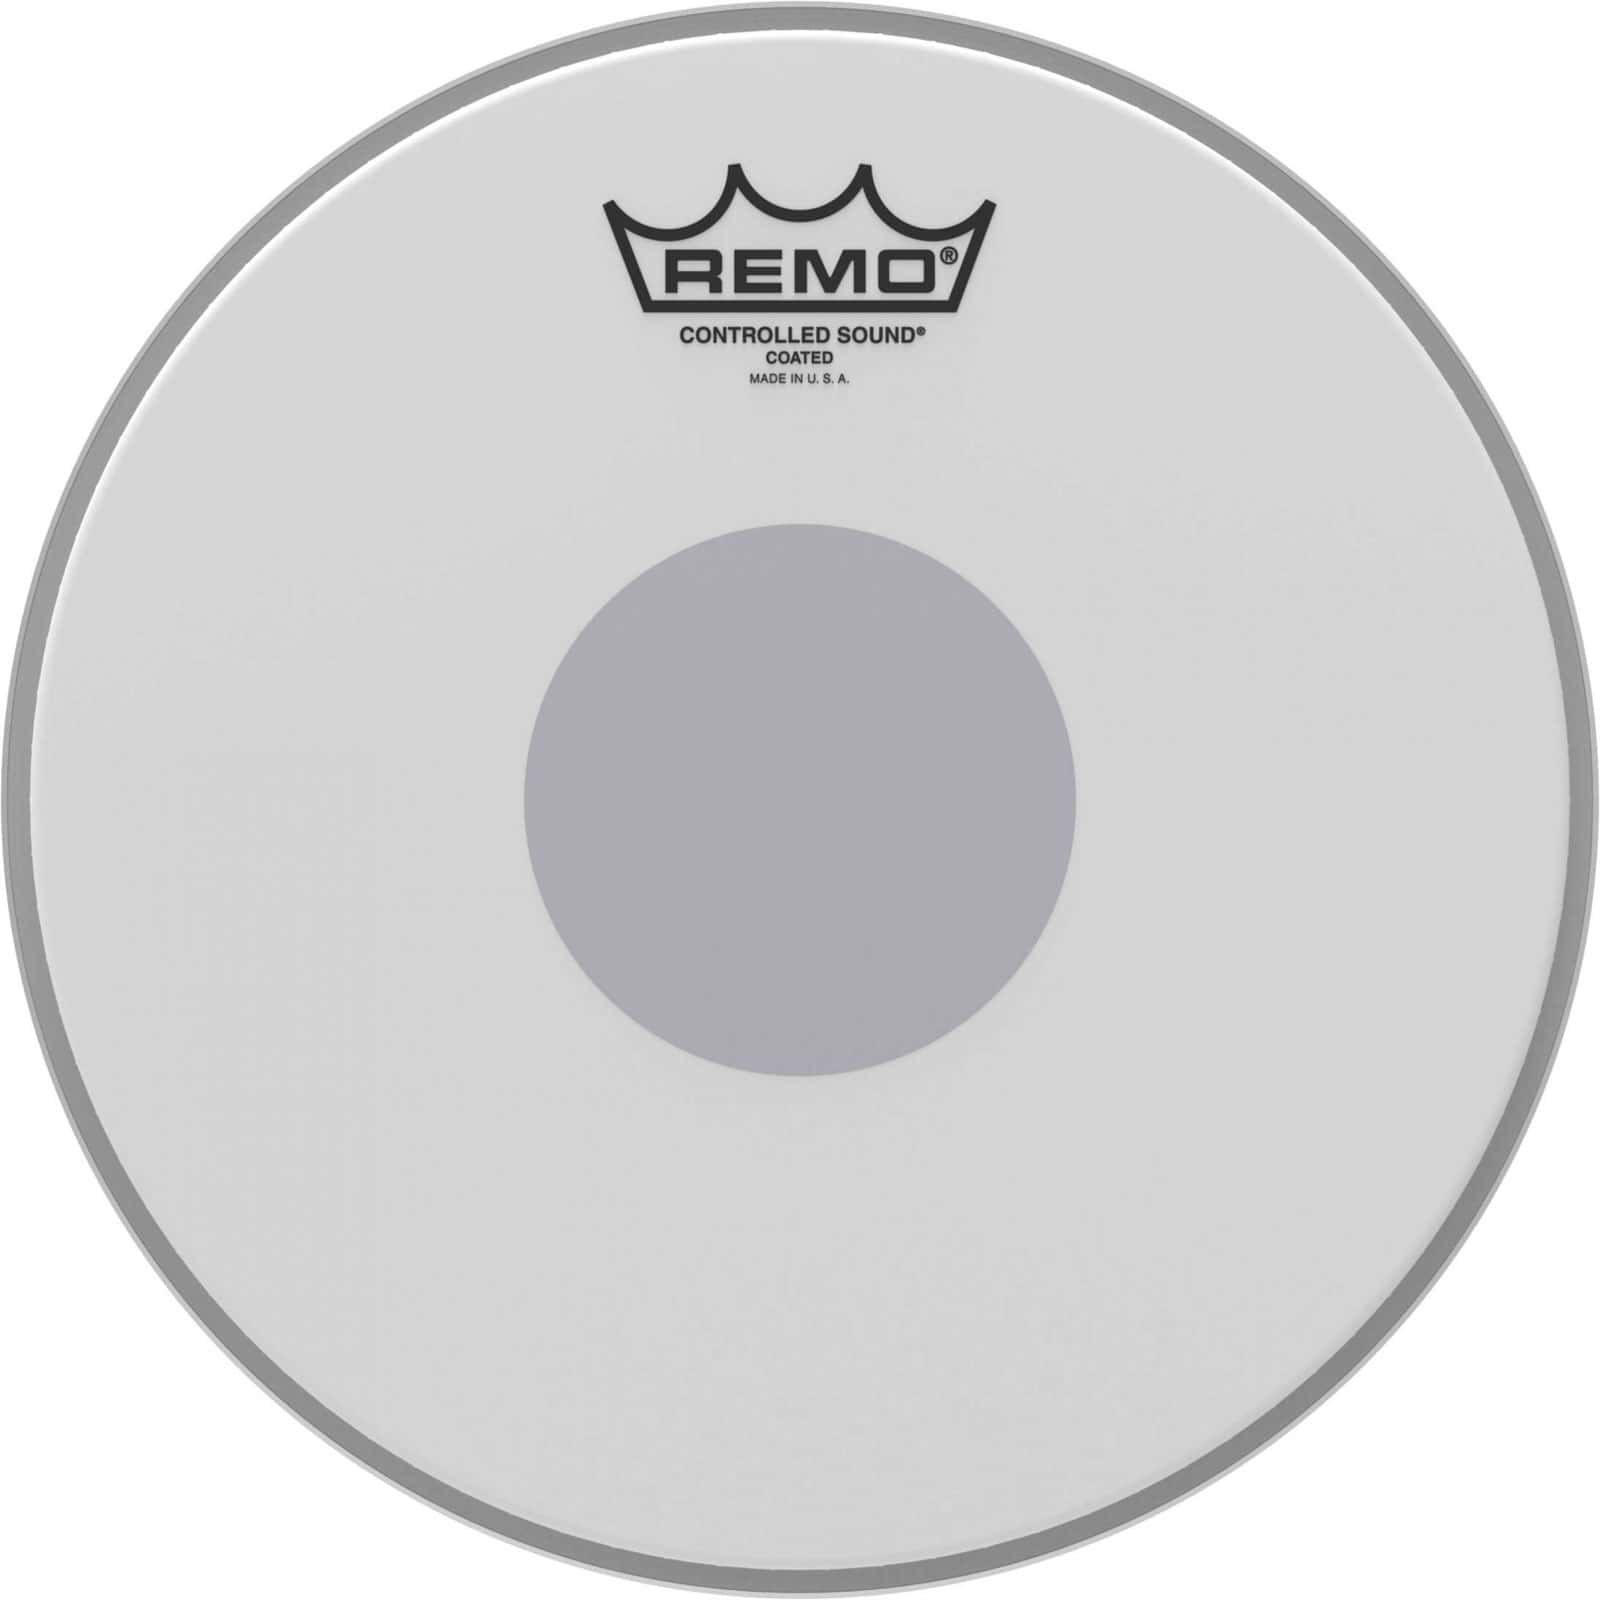 REMO CS-0110-10 CONTROLLED SOUND 10 COATED